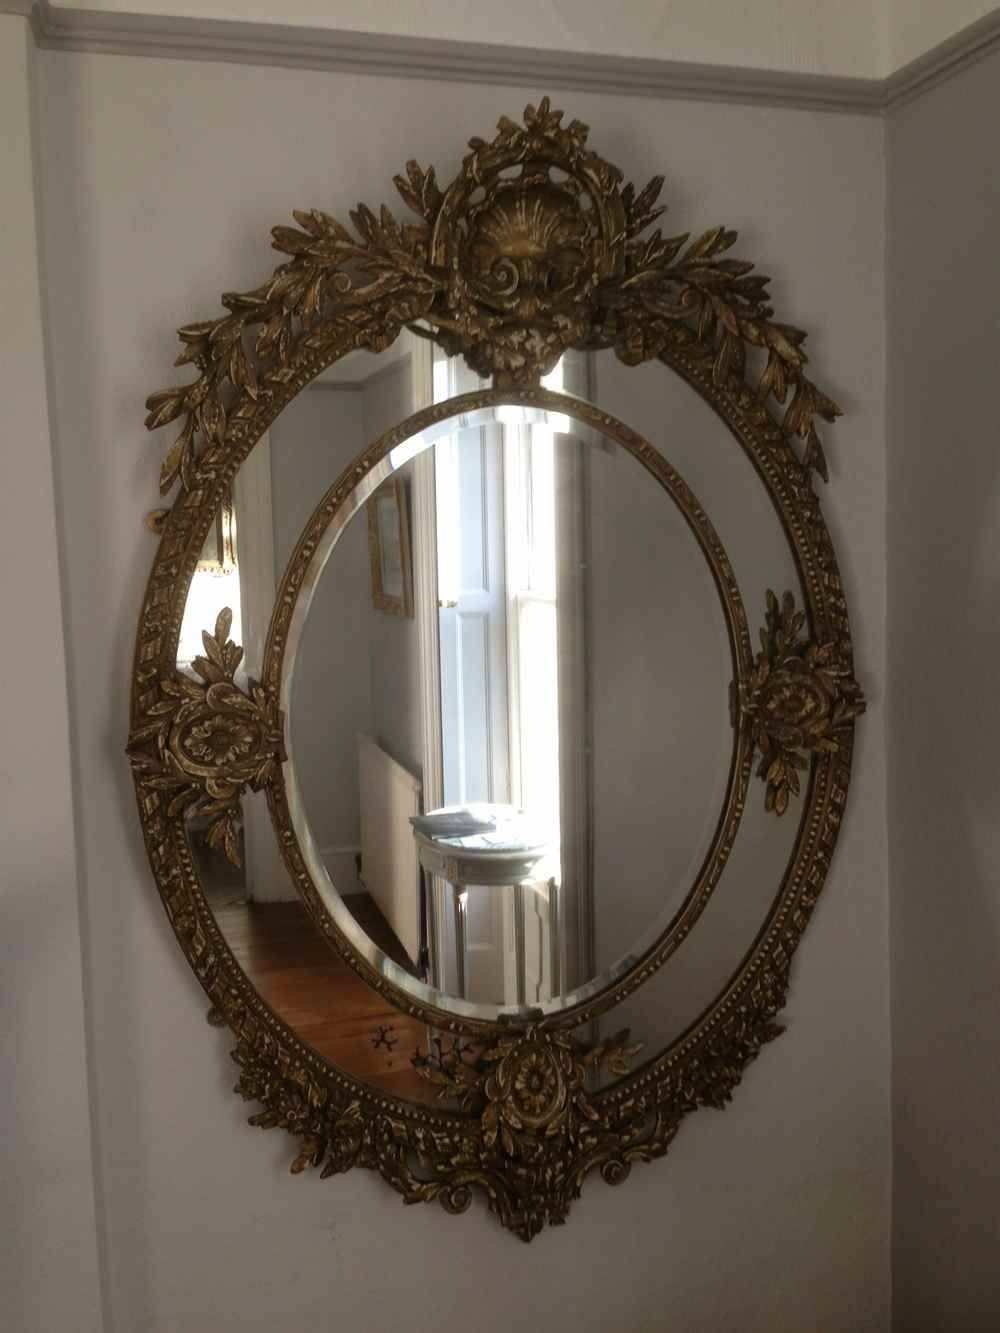 A Wonderful Large Antique 19th Century French Carved Wood Oval Intended For Large Oval Wall Mirrors (View 7 of 15)